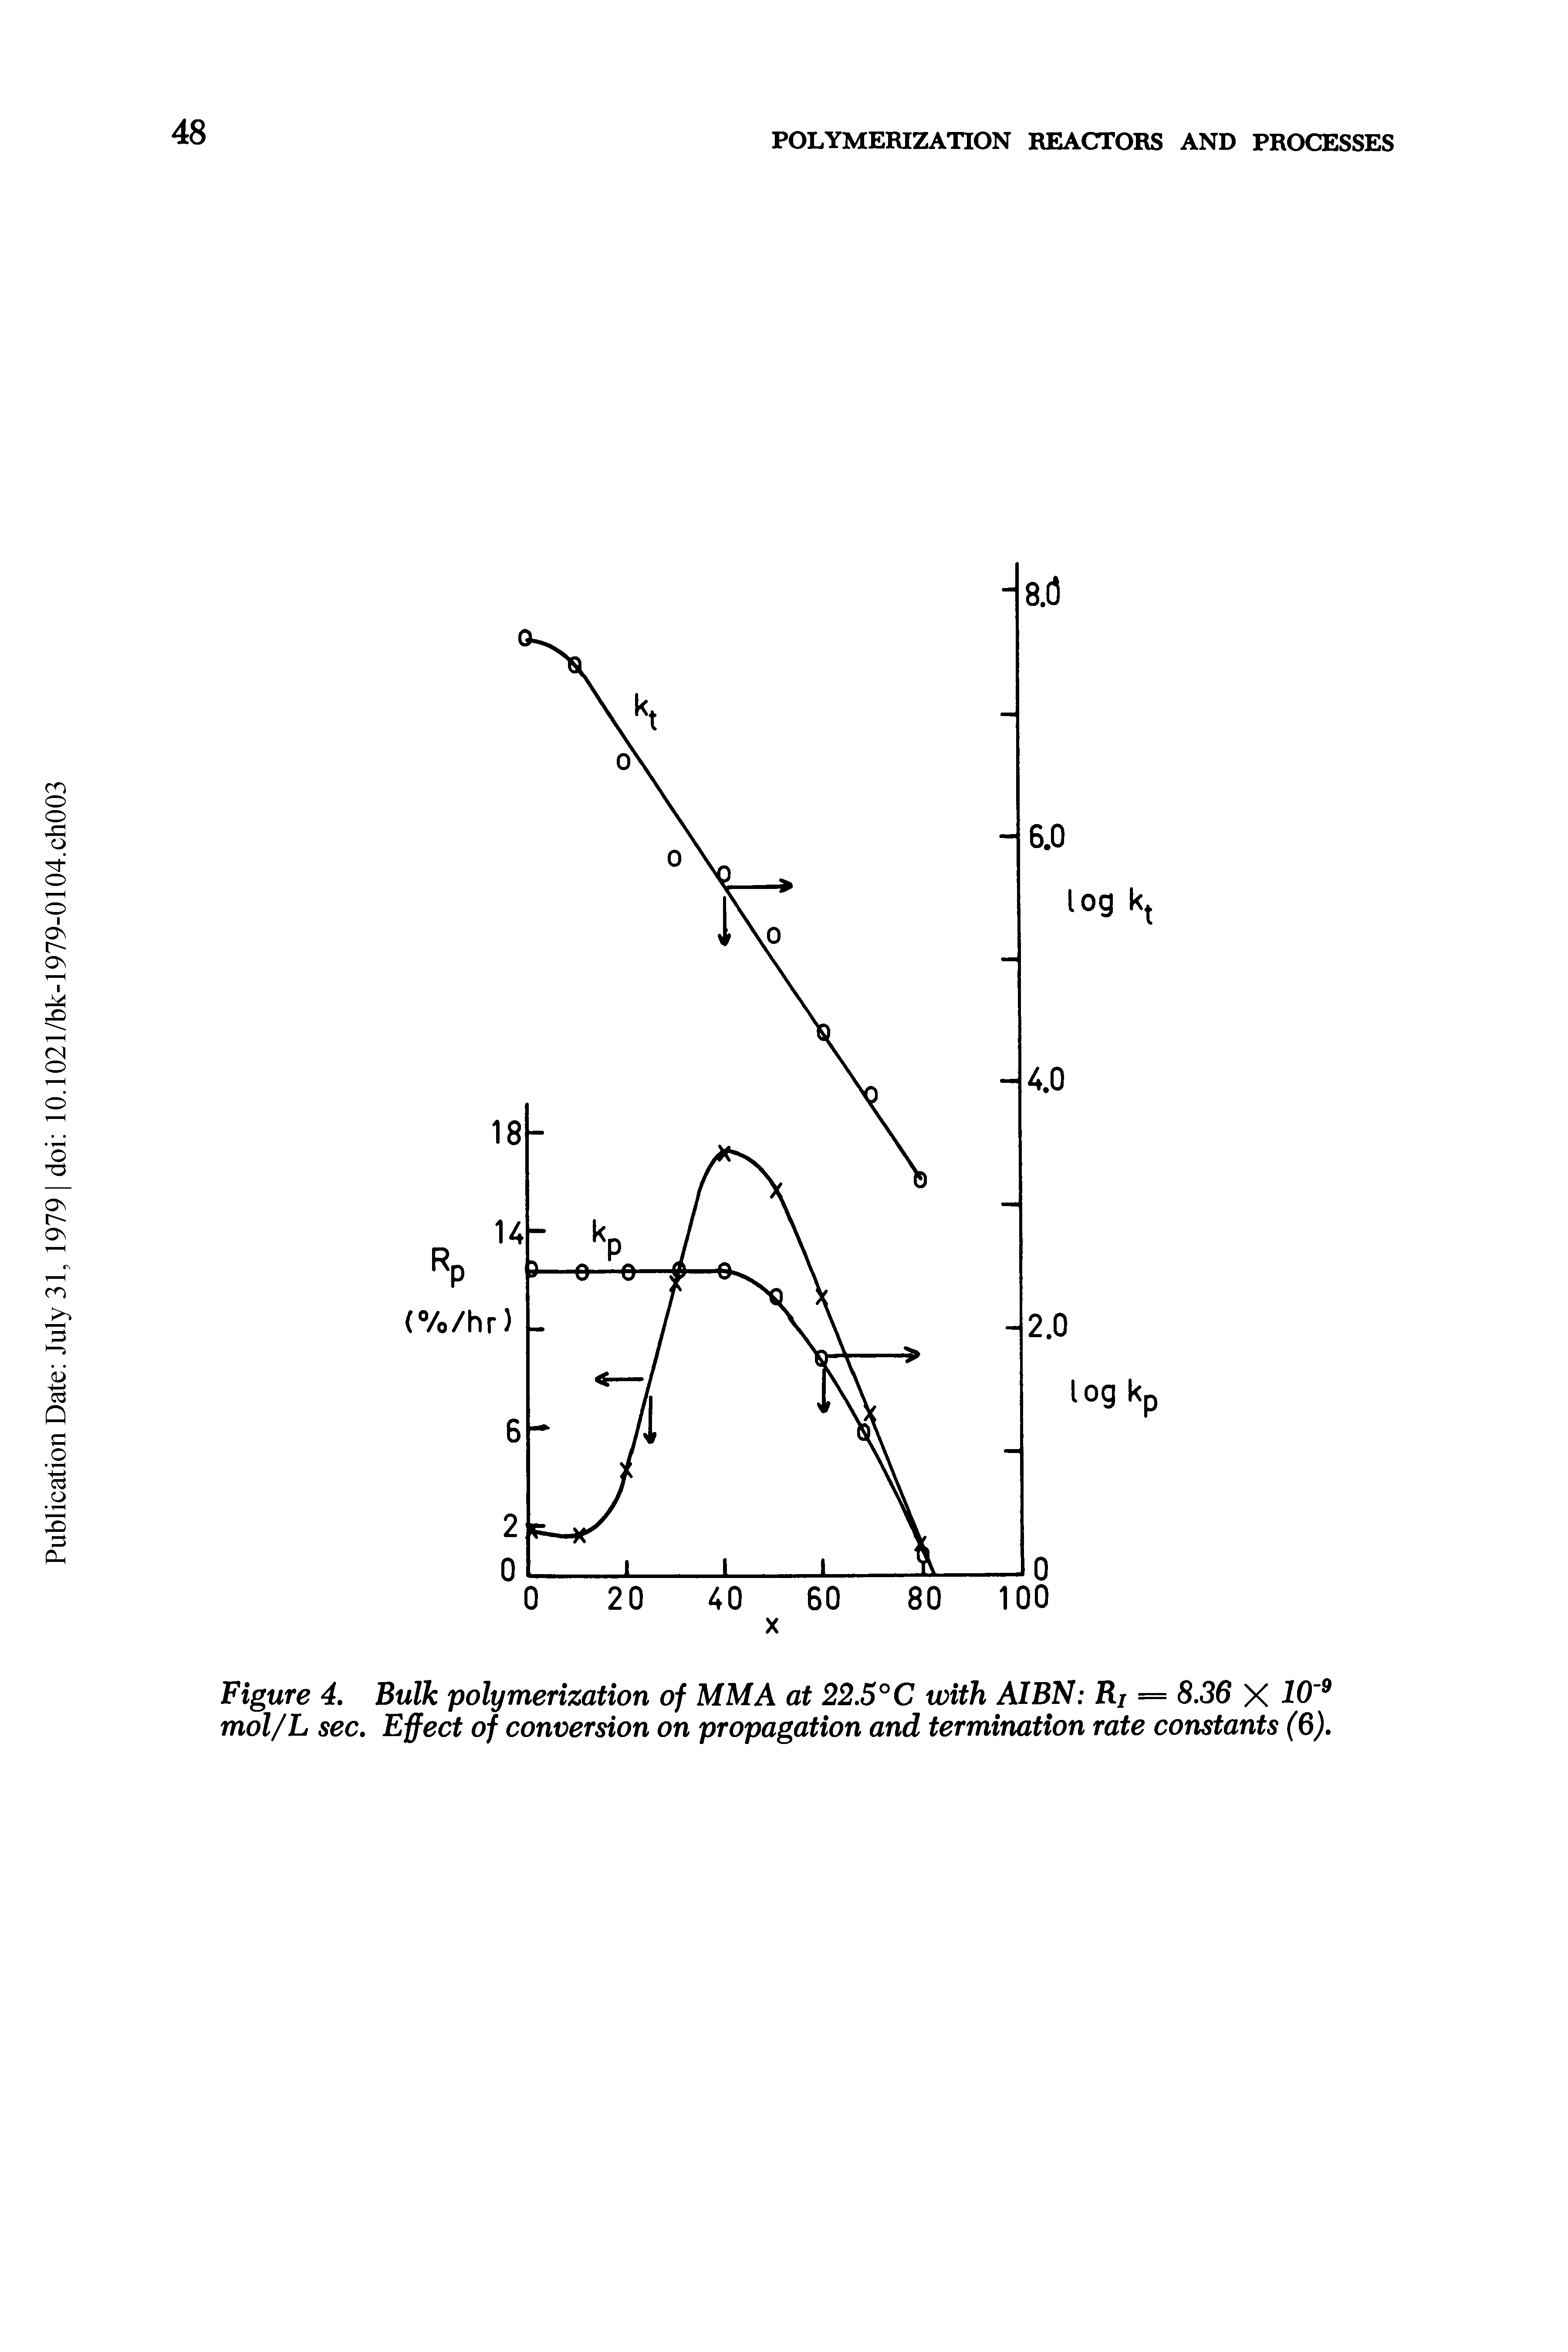 Figure 4. Bulk polymerization of MM A at 22.5° C with AIBN Ri = 8.36 X 10 mol/L sec. Effect of conversion on propagation and termination rate constants (6).